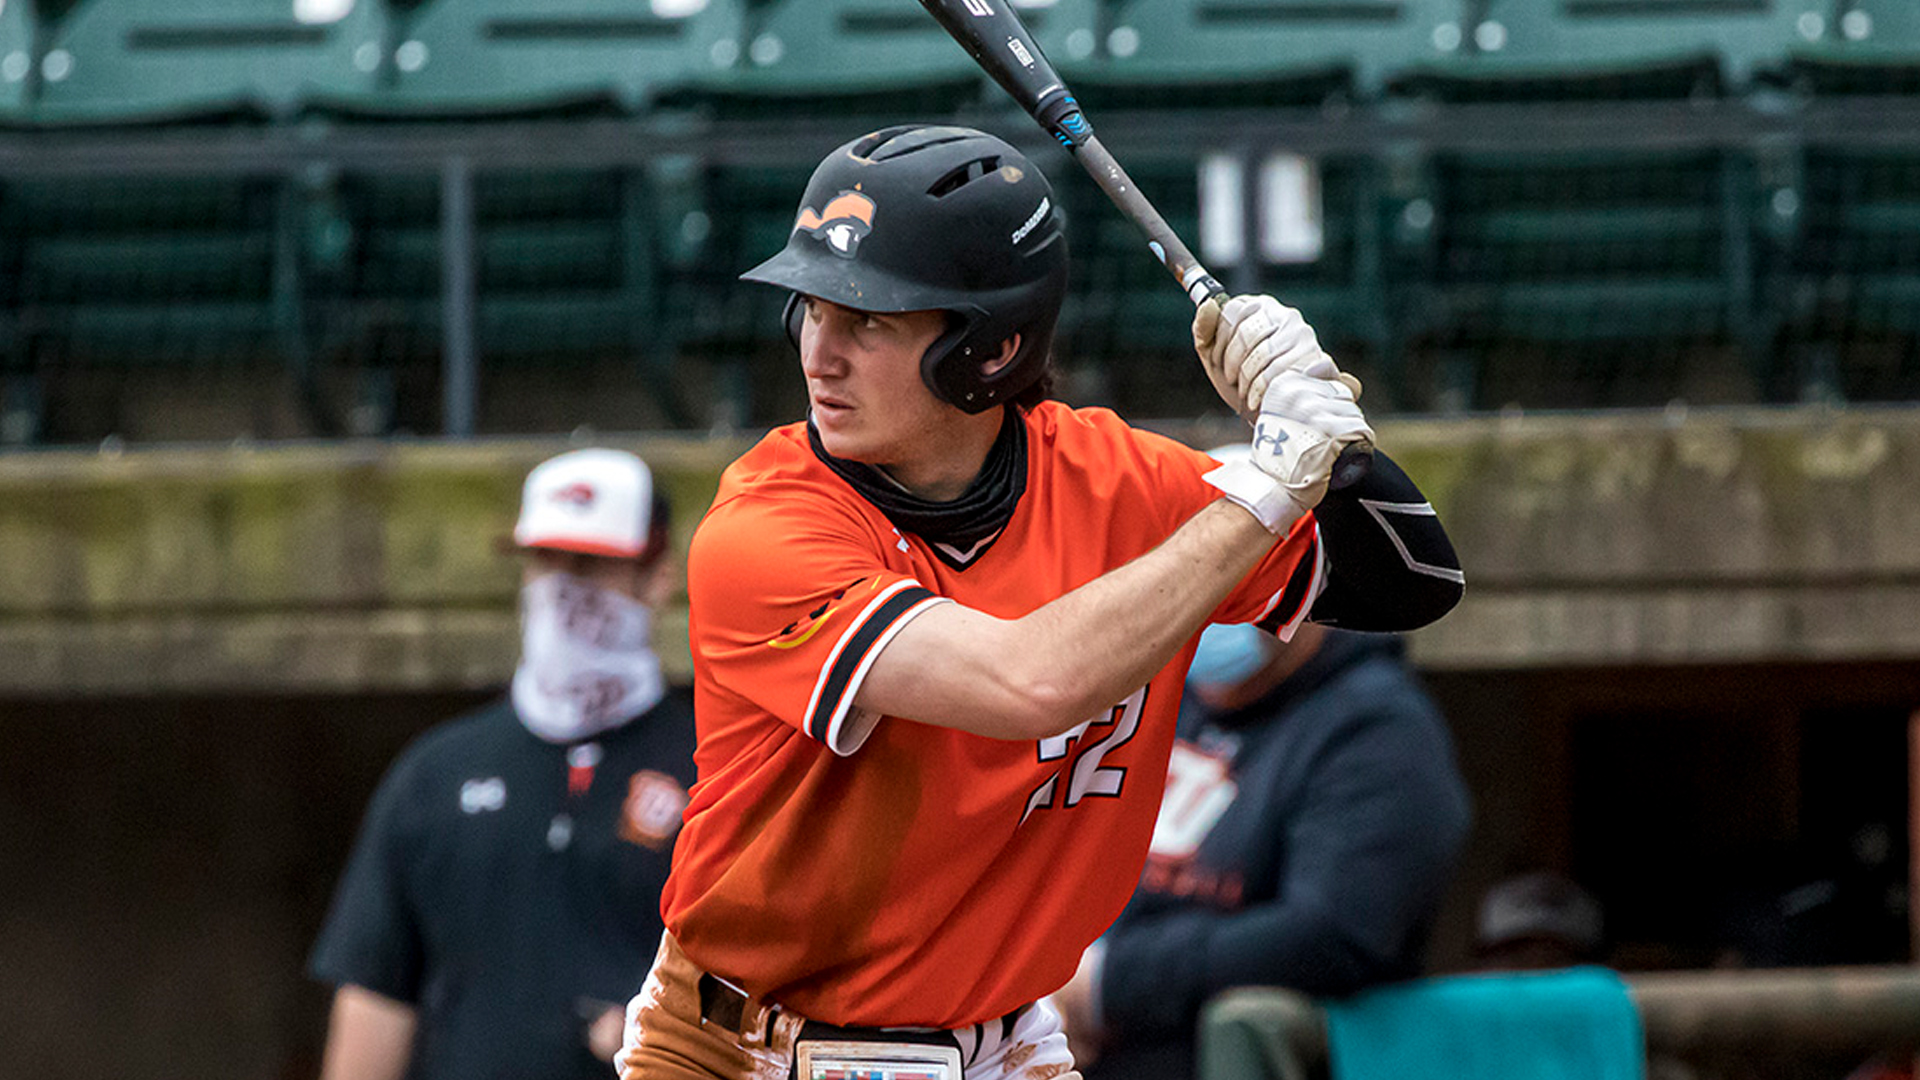 Zane Keener went 3-for-5 with 3 RBI in Tusculum's 14-5 win at Barry.